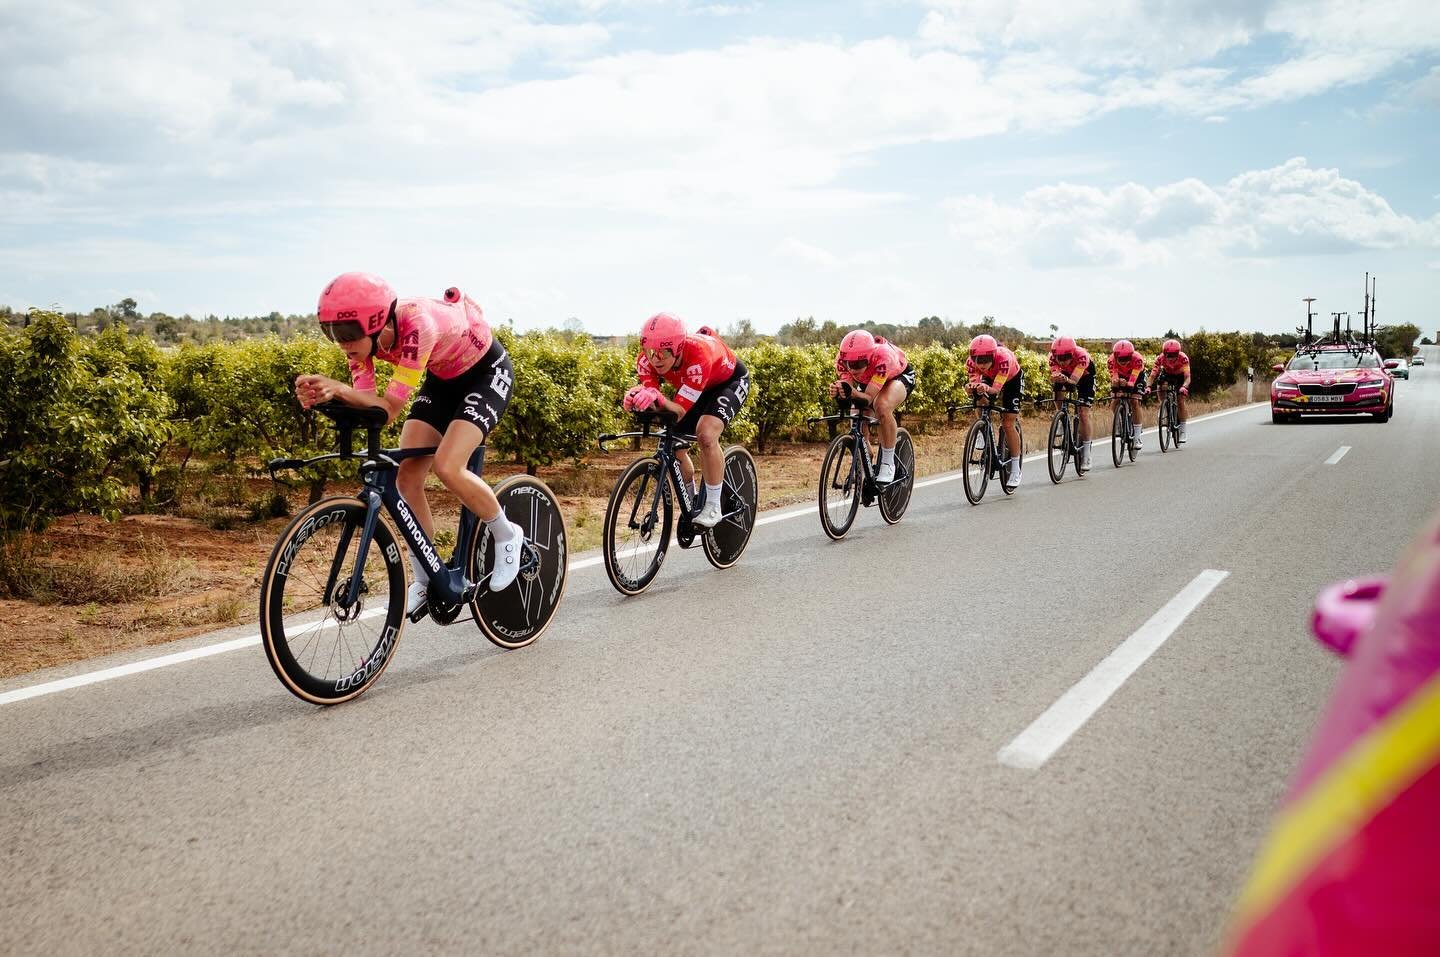 Top 5 for us today in the TTT, and only 9 seconds off the winner 😁. We are happy with the result, but more importantly we are proud of how we rode. With only 1 day of TTT  training, we gave our best and rode as a team, and with that we are so proud 